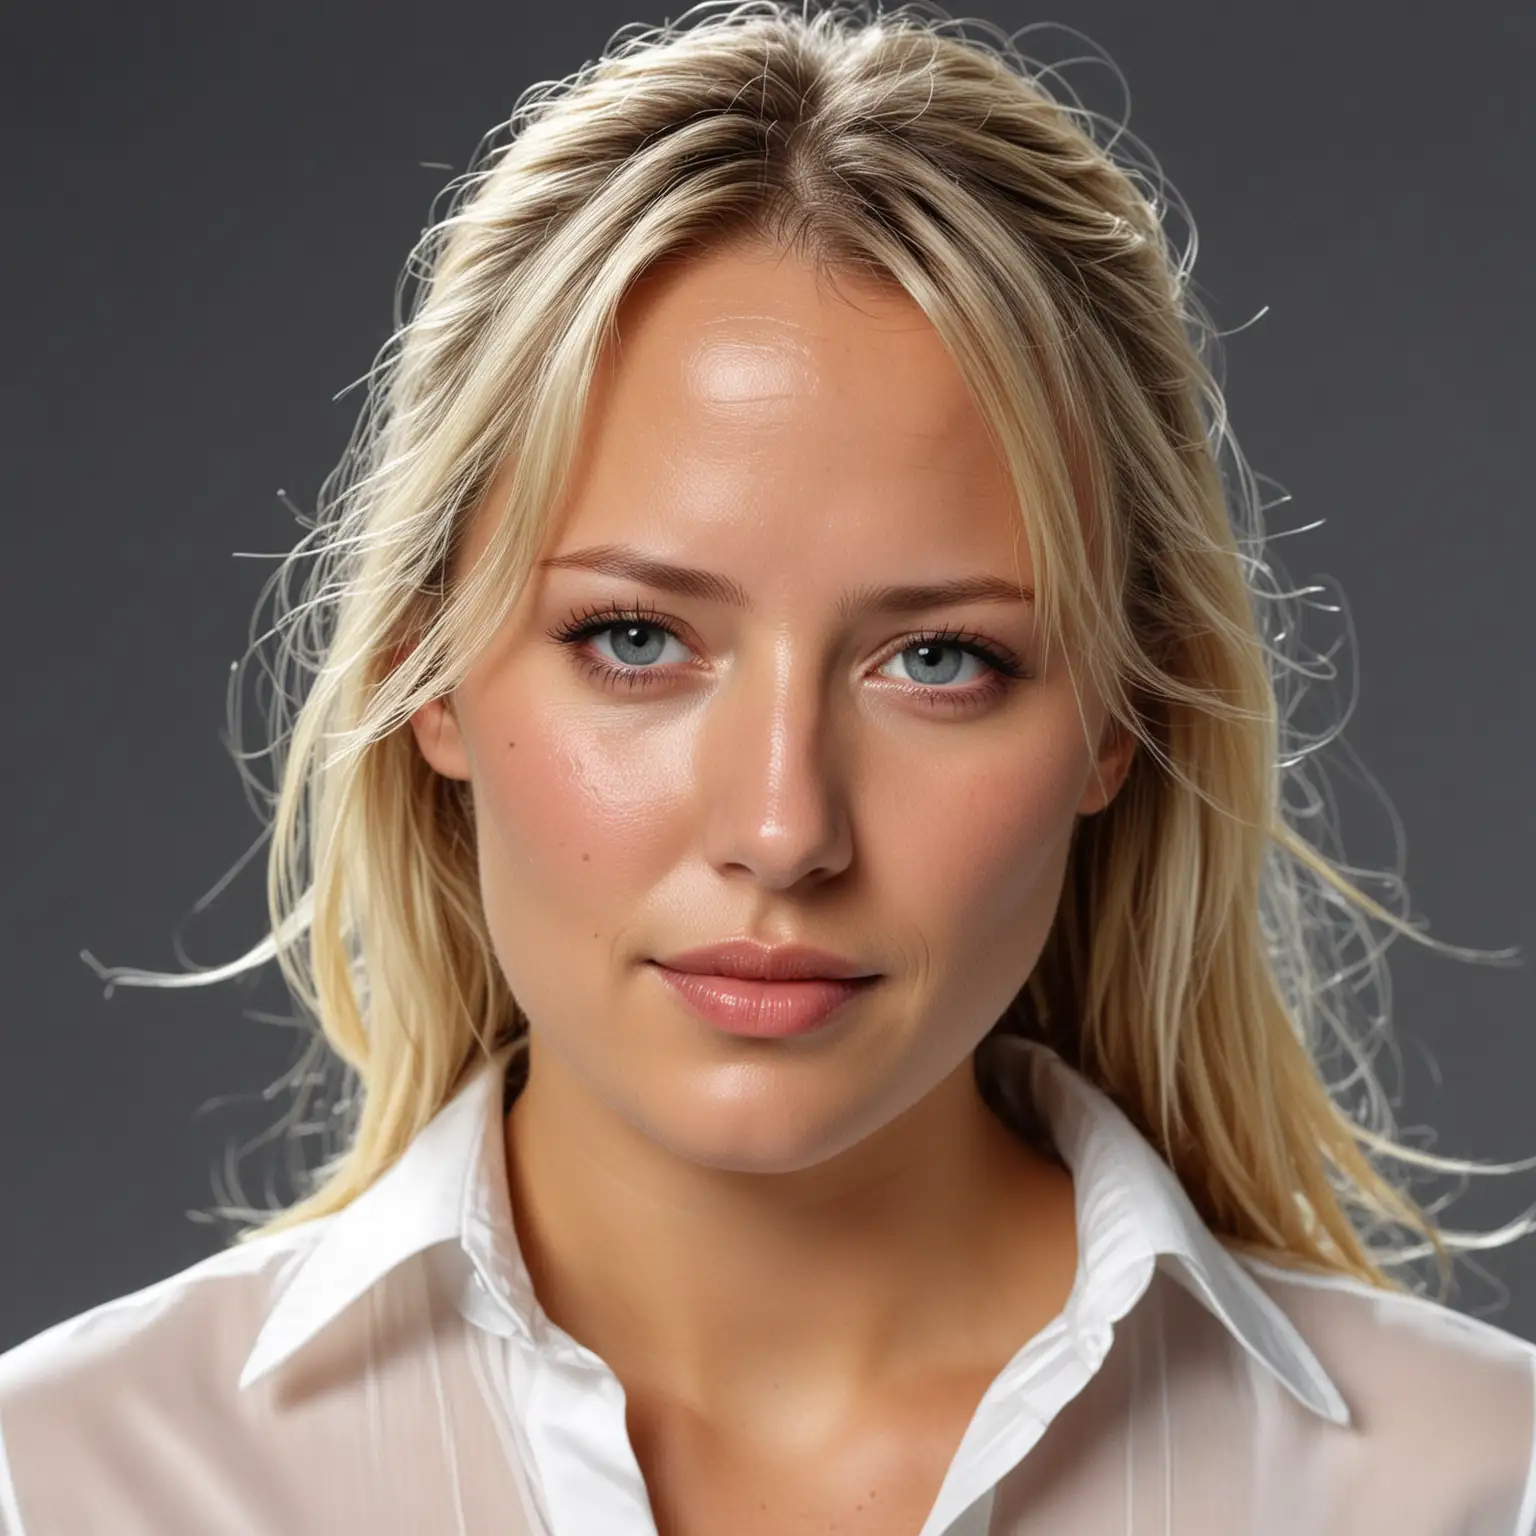 Alluring and Submissive Marion Marchal Le Pen ID Photo in Wet Silky White Shirt